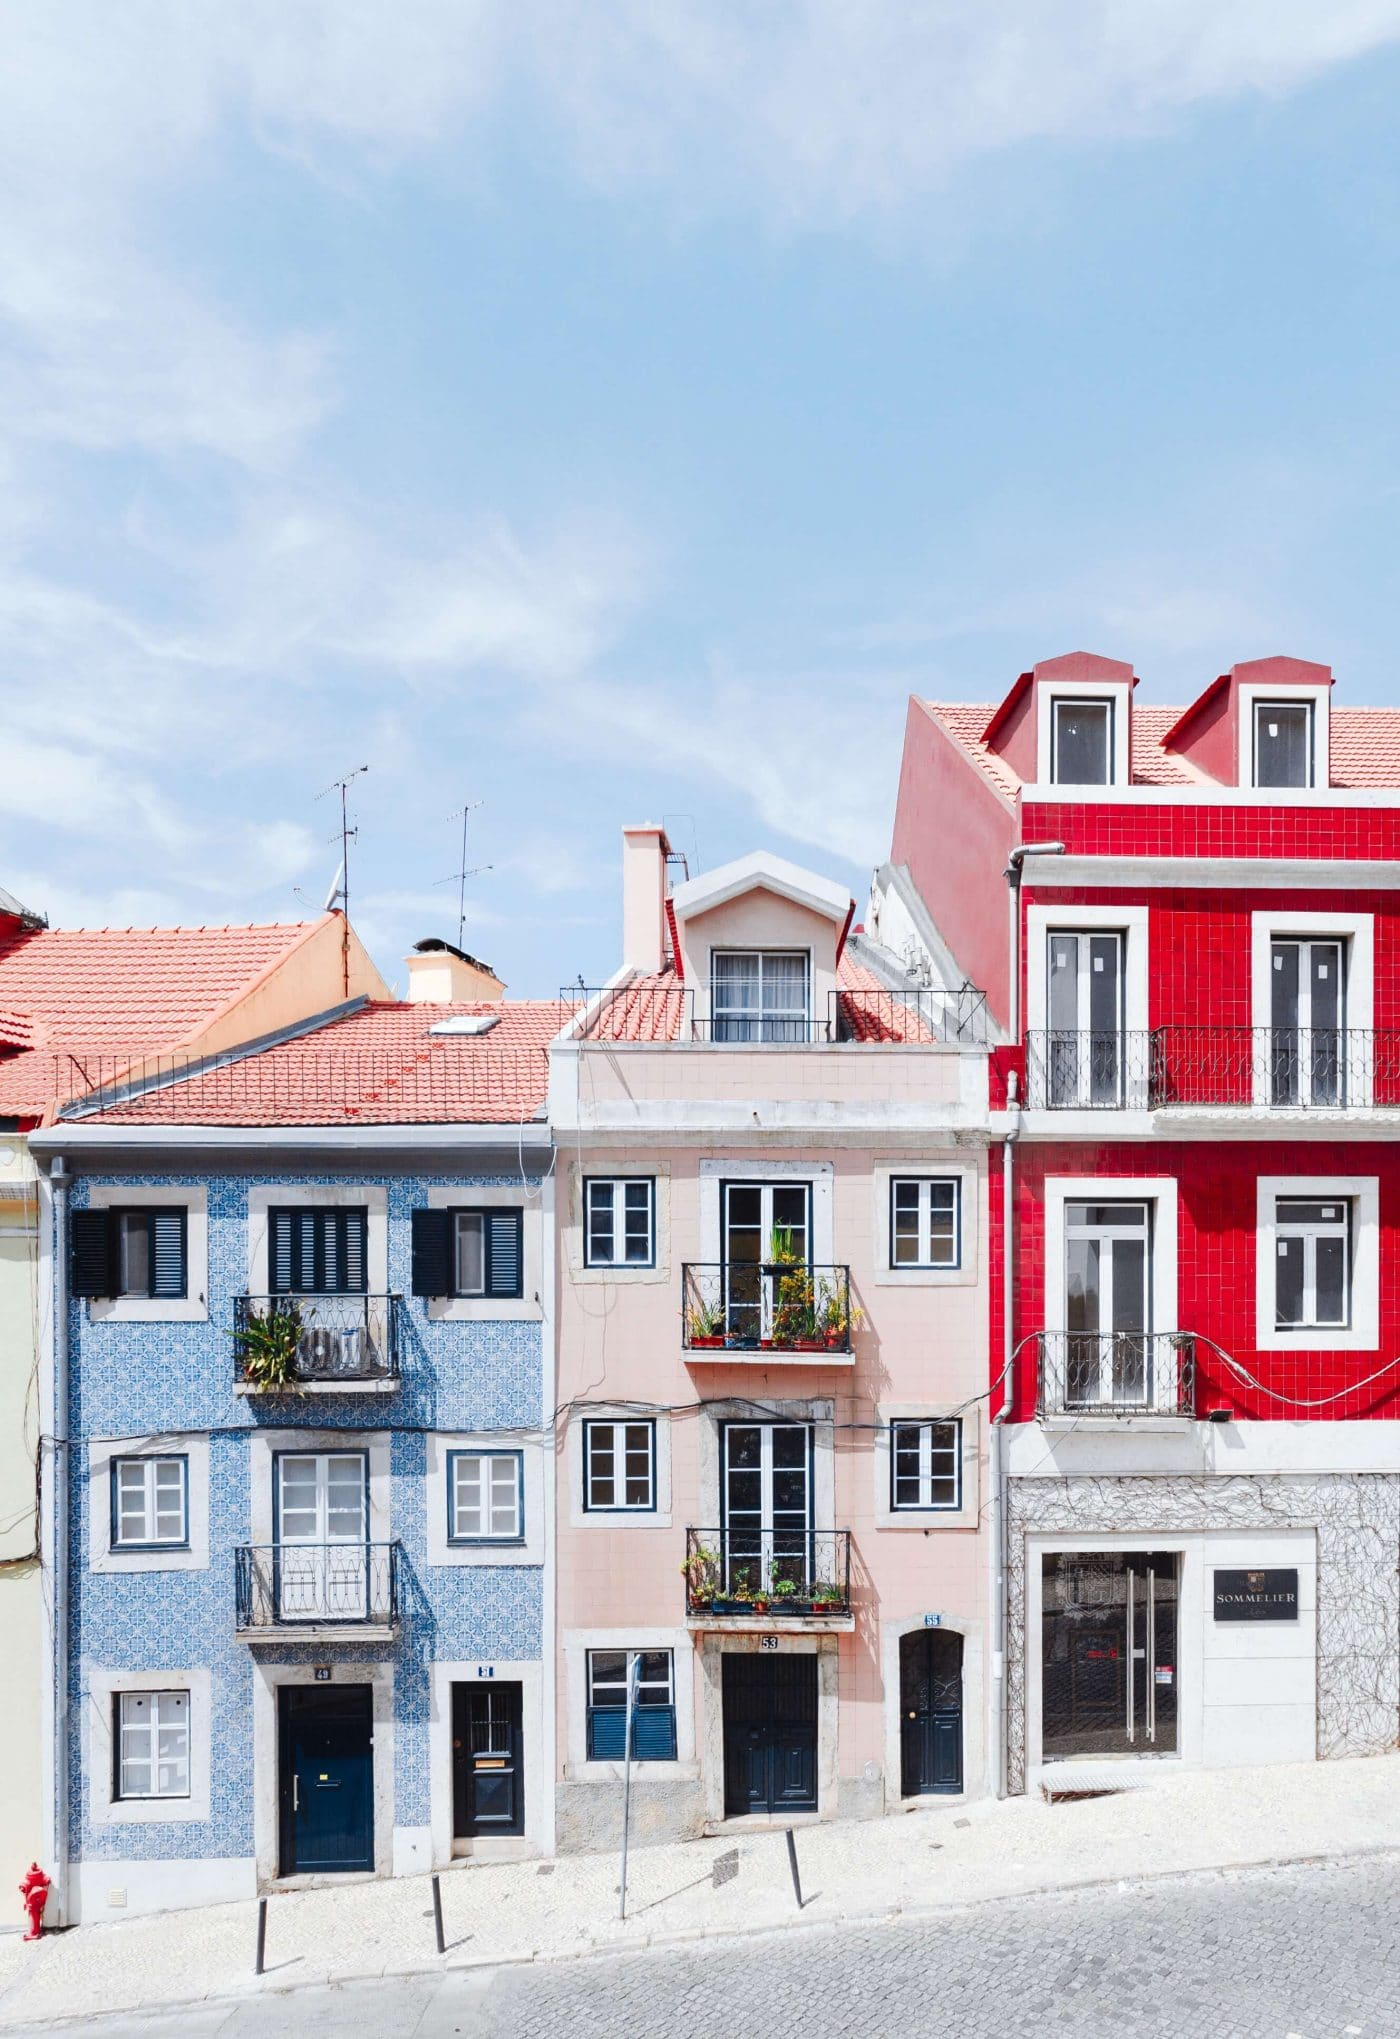 Colorful row houses iN Lisbon, Portugal – Photo by Hugo Sousa on Unsplash